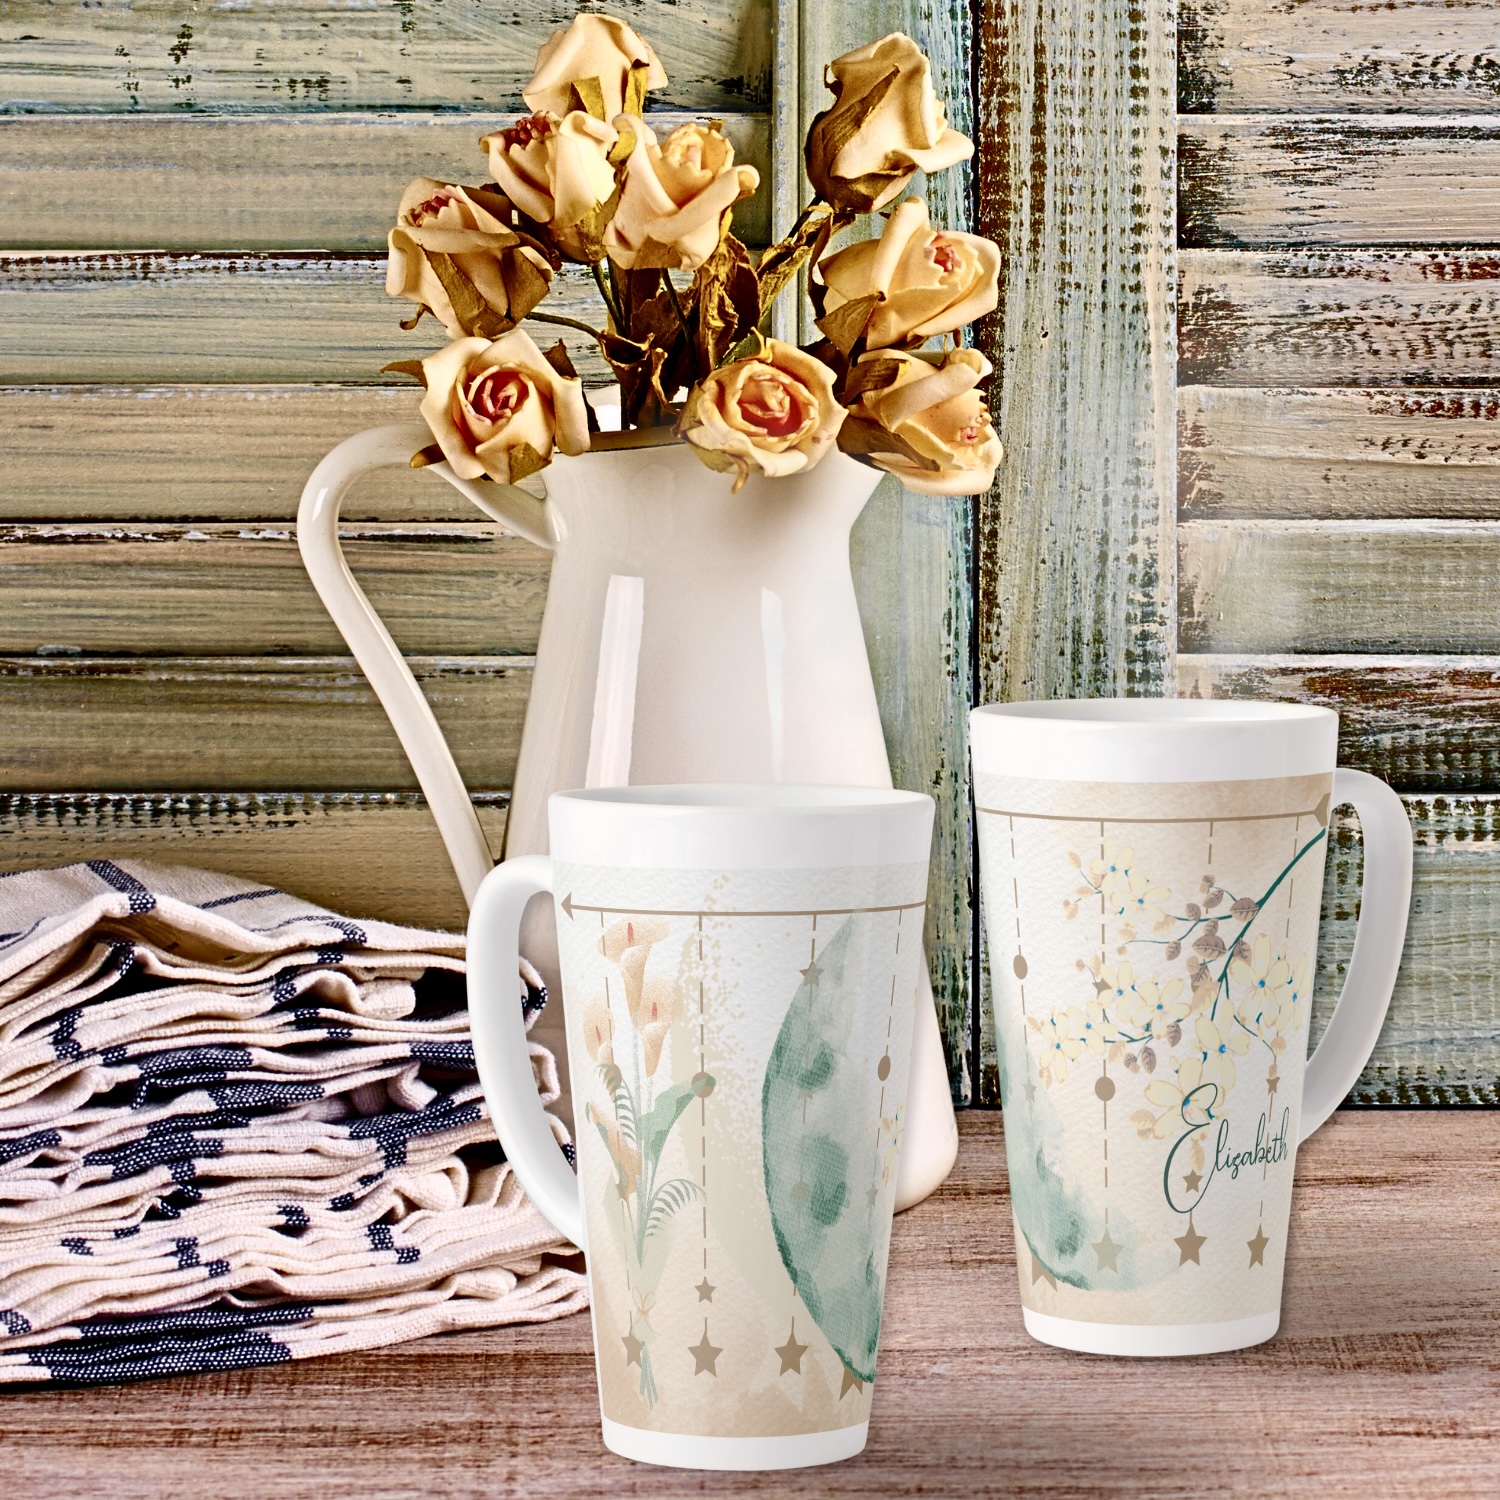 Embrace tranquility with our Moonlit Flowers Decorative Latte Mug. Earthy tones and delicate florals adorn both sides of the mug.